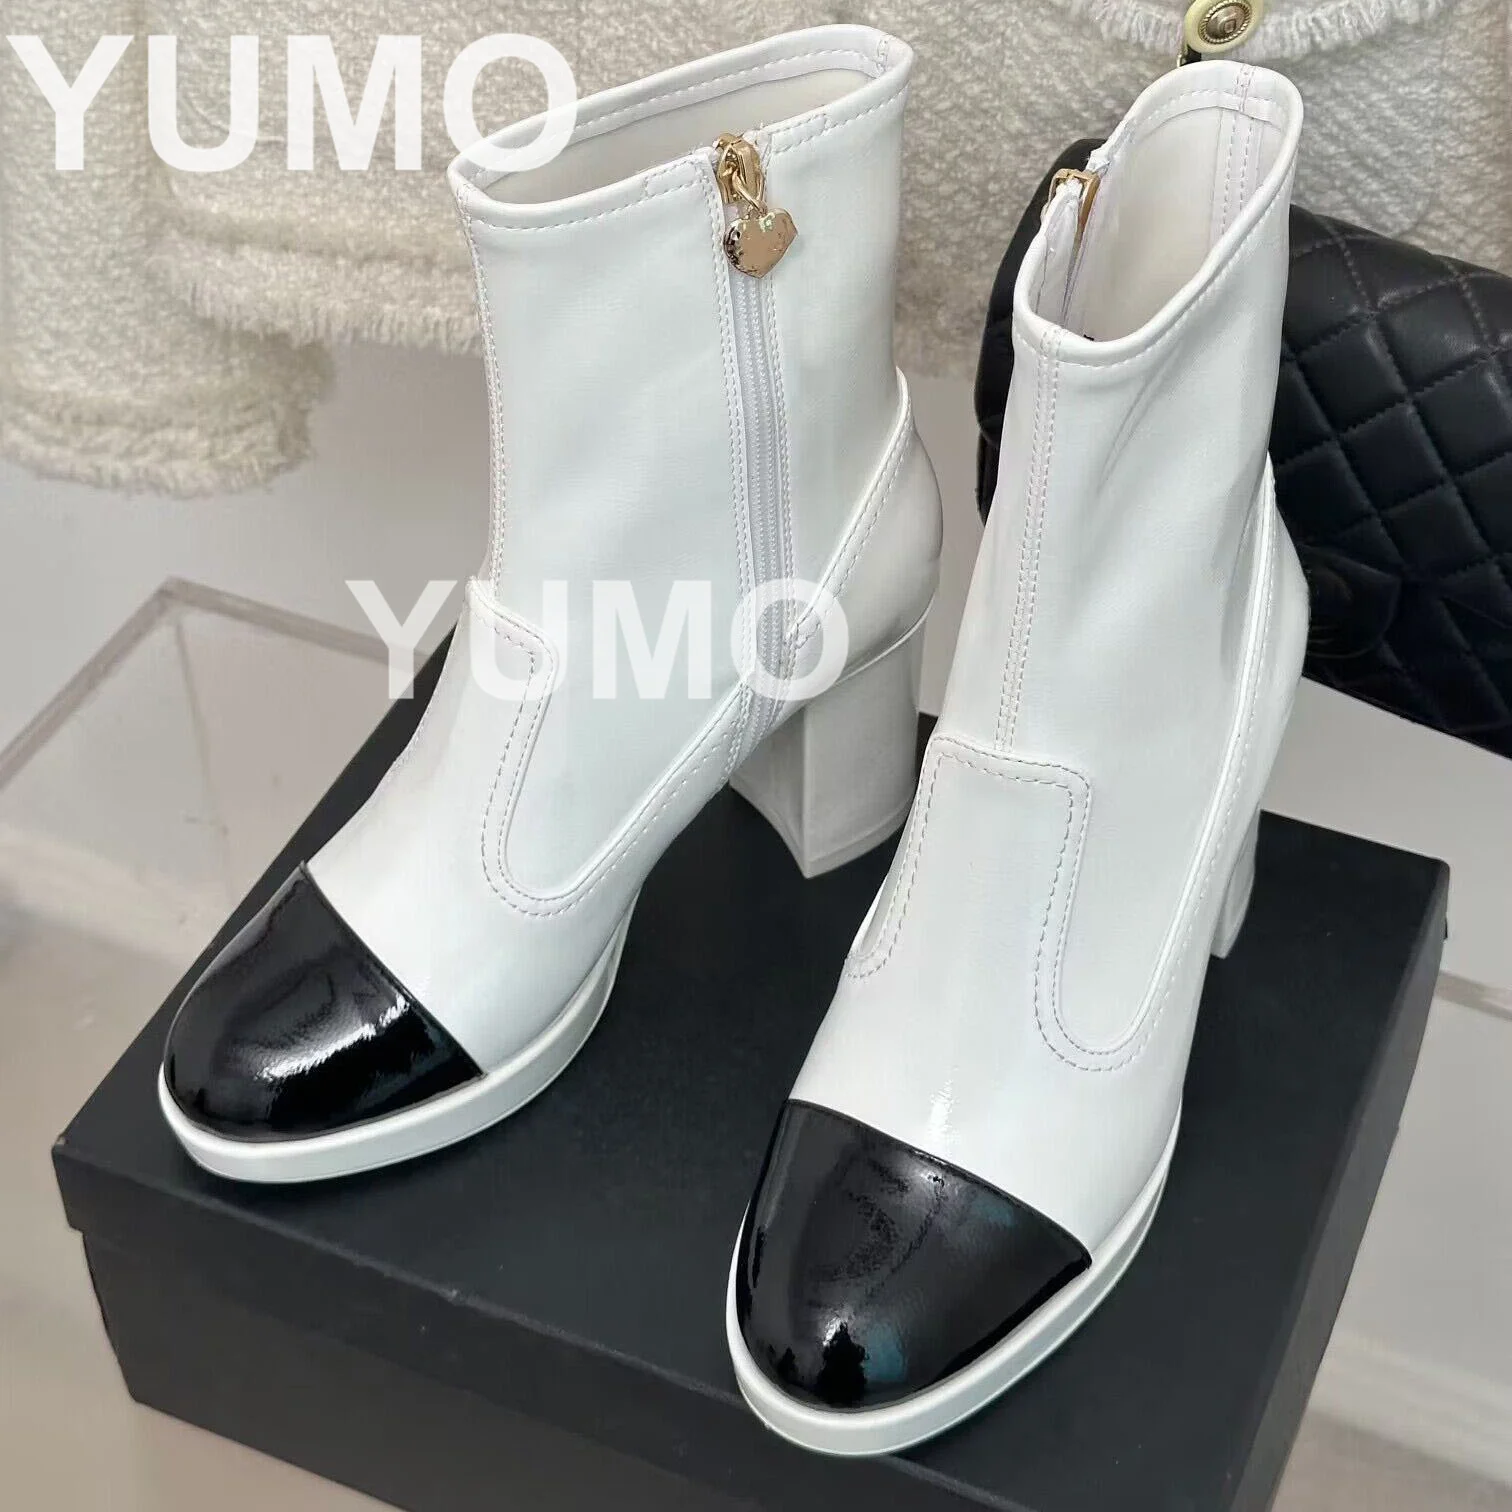 

2023 Women Autumn Winter Square High Heels Ankle Boos Outdoor Round Toe Color Match Sweet Consise Slip On Short Boots Size 34-41